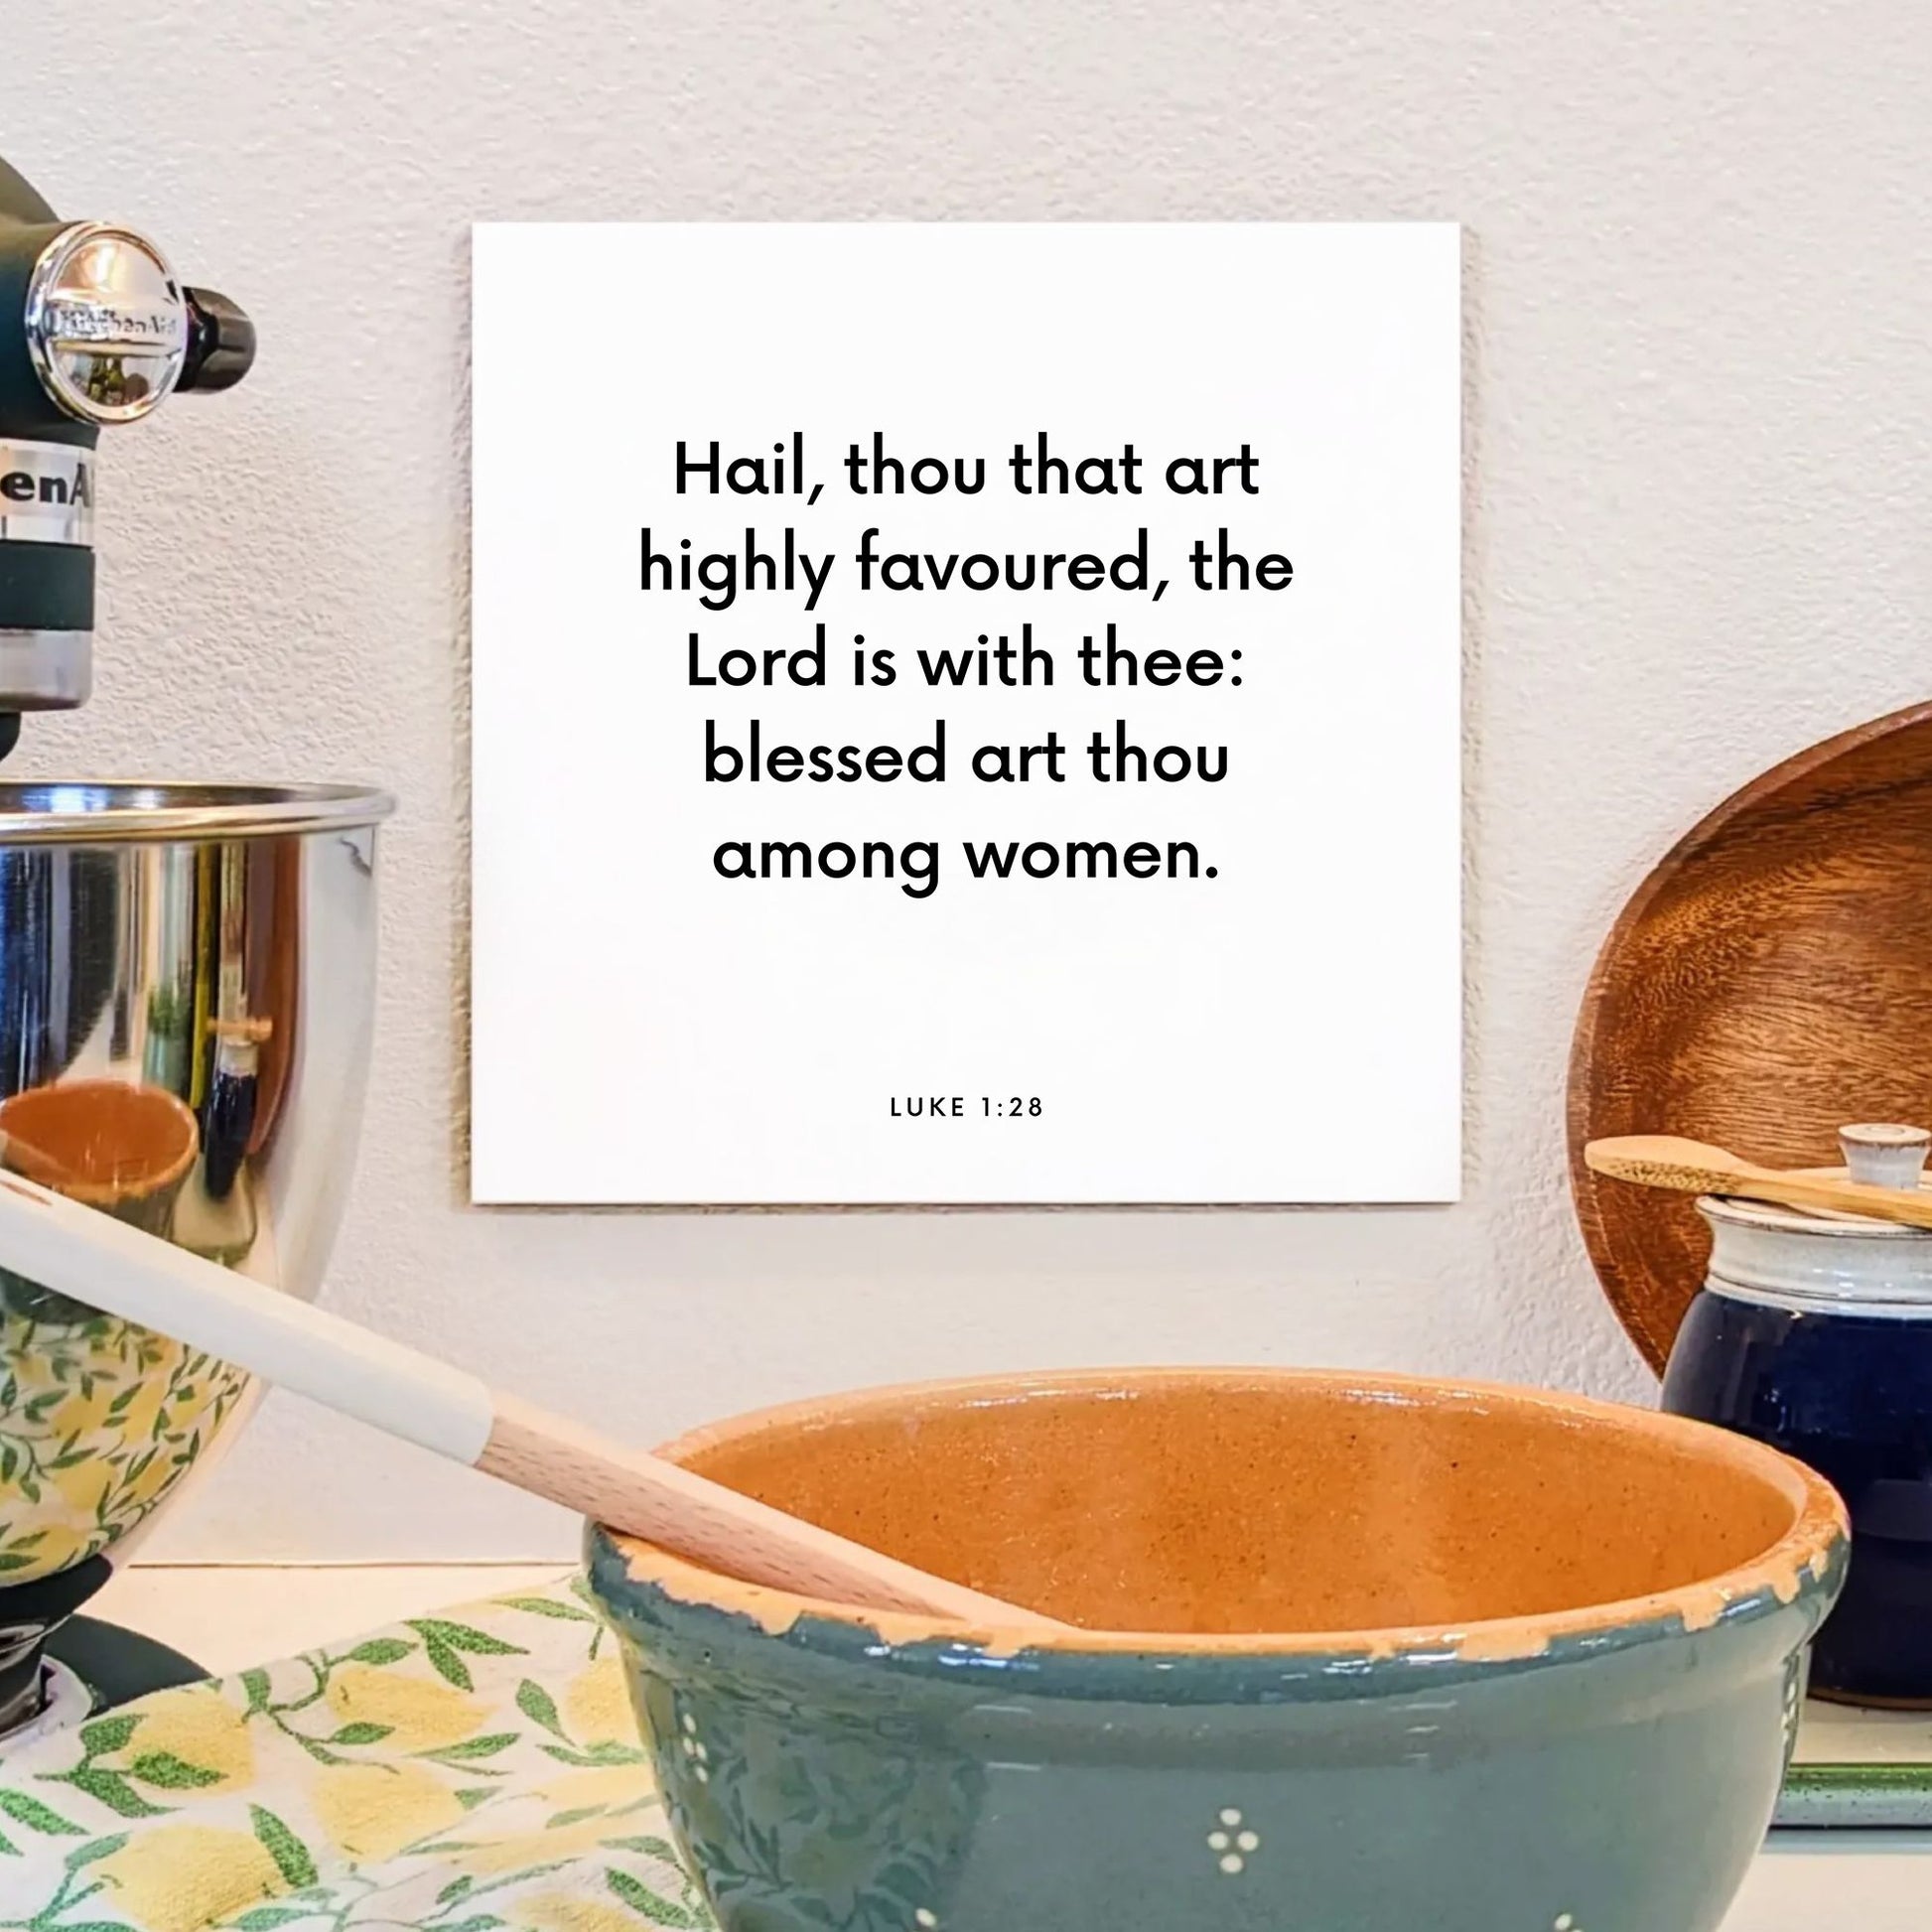 Kitchen mouting of the scripture tile for Luke 1:28 - "Hail, thou that art highly favoured"